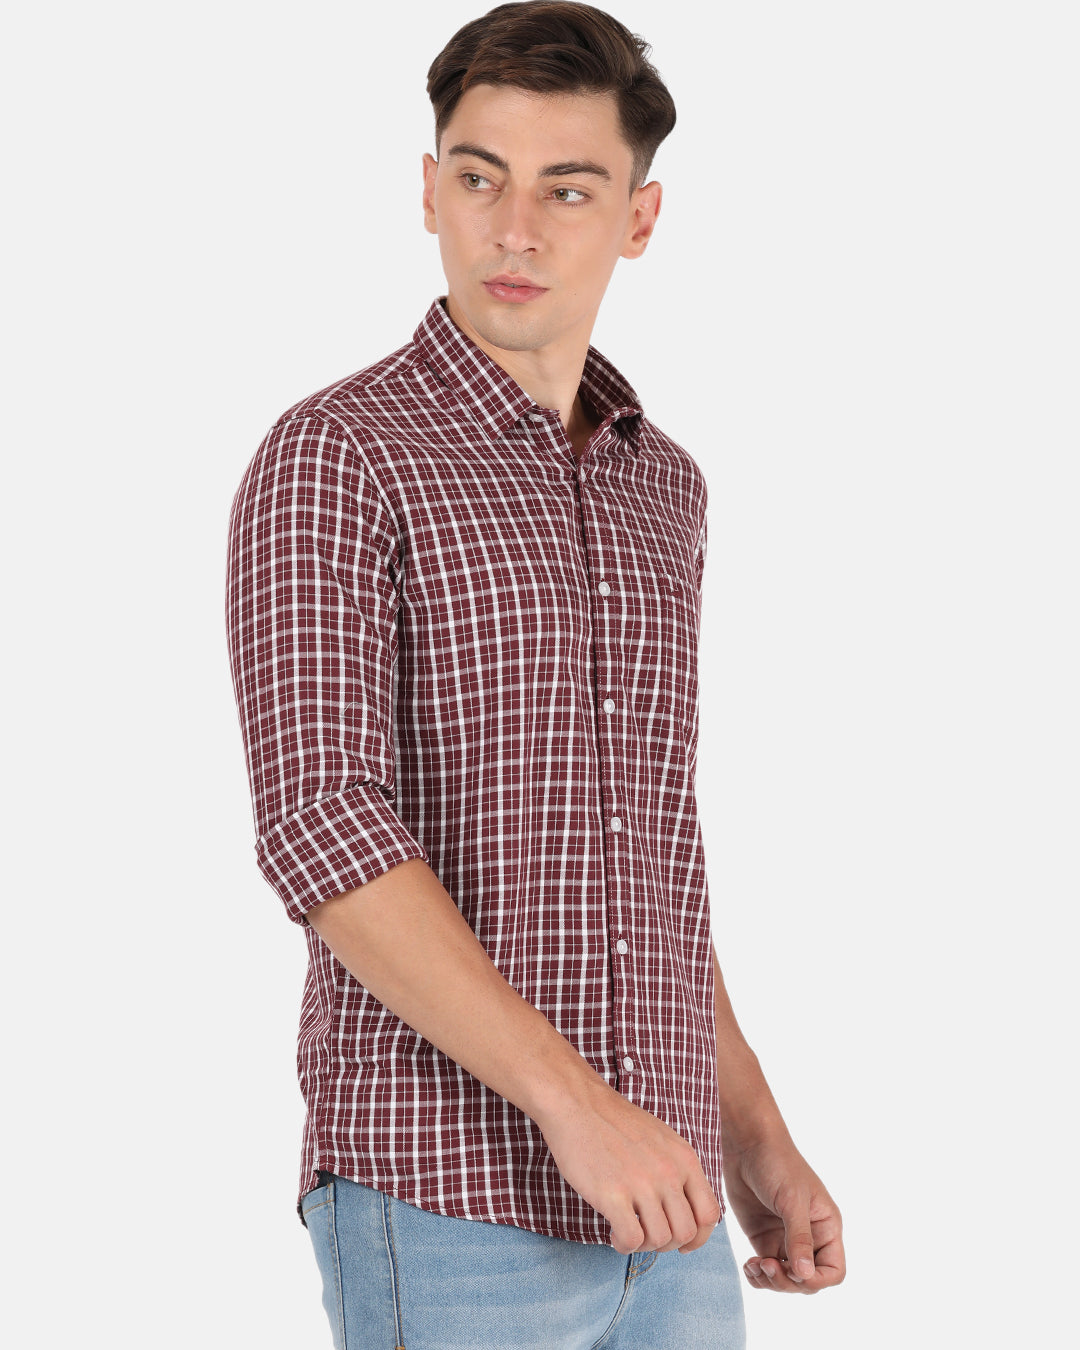 Crocodile Casual Full Sleeve Slim Fit Checks Maroon with Collar Shirt for Men